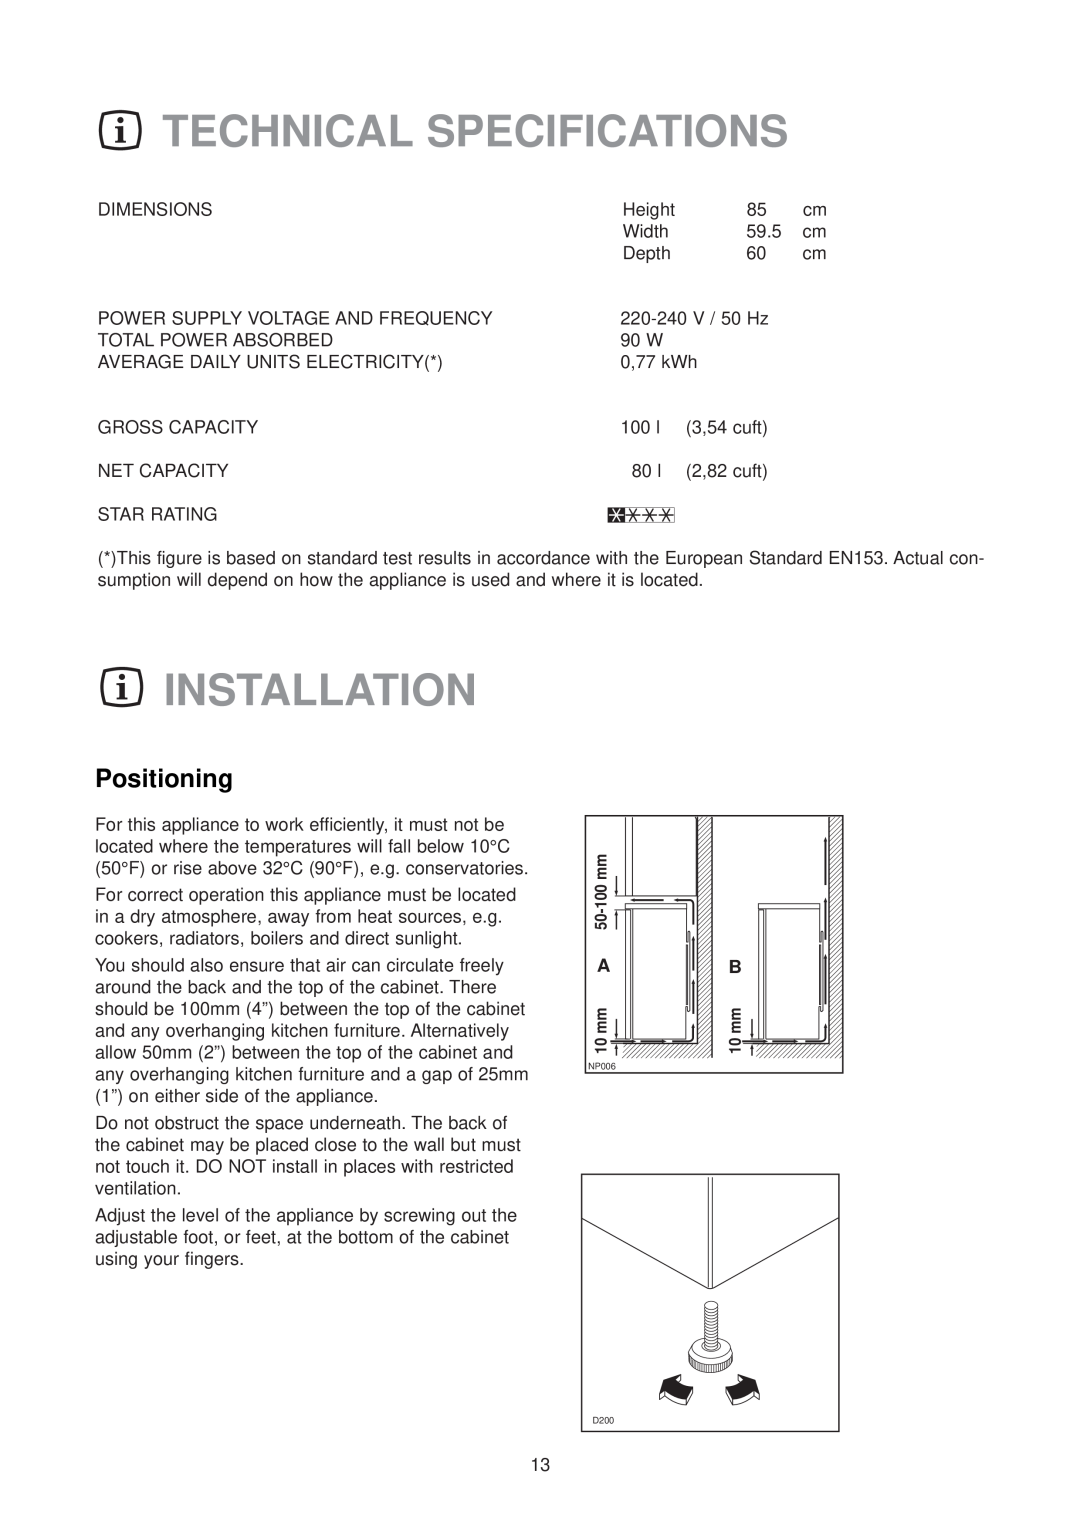 Zanussi ZFX 74 W manual Technical Specifications, Installation, Positioning 